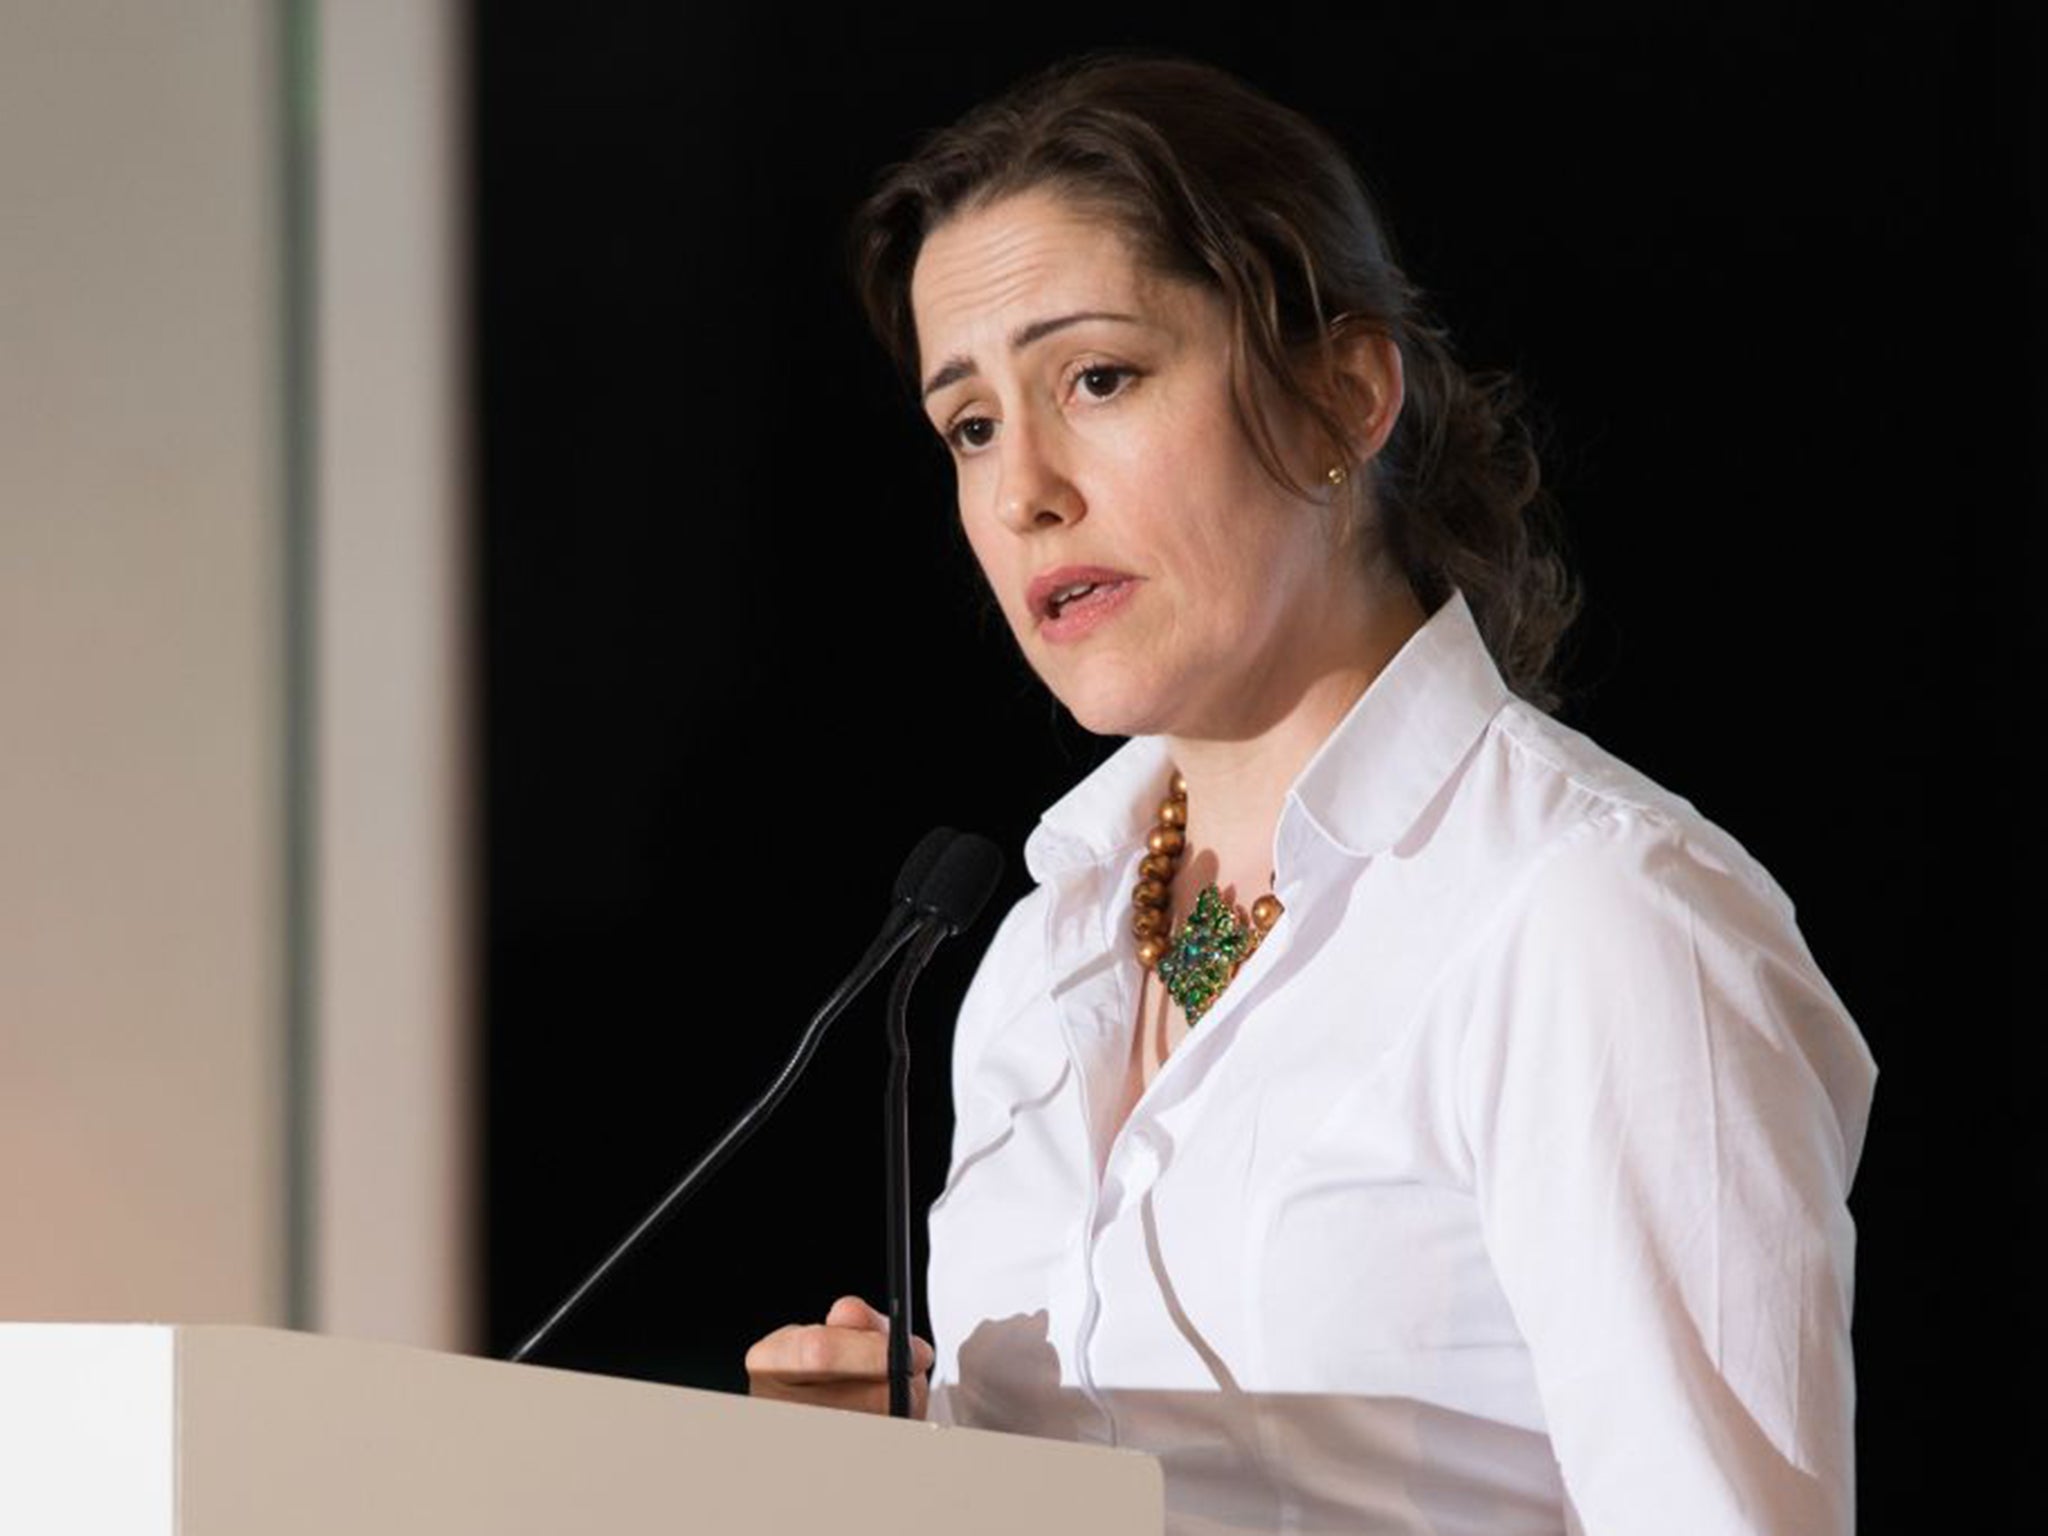 Victoria Atkins said she was 'cautious' about the prevalence of treatments for trans teenagers